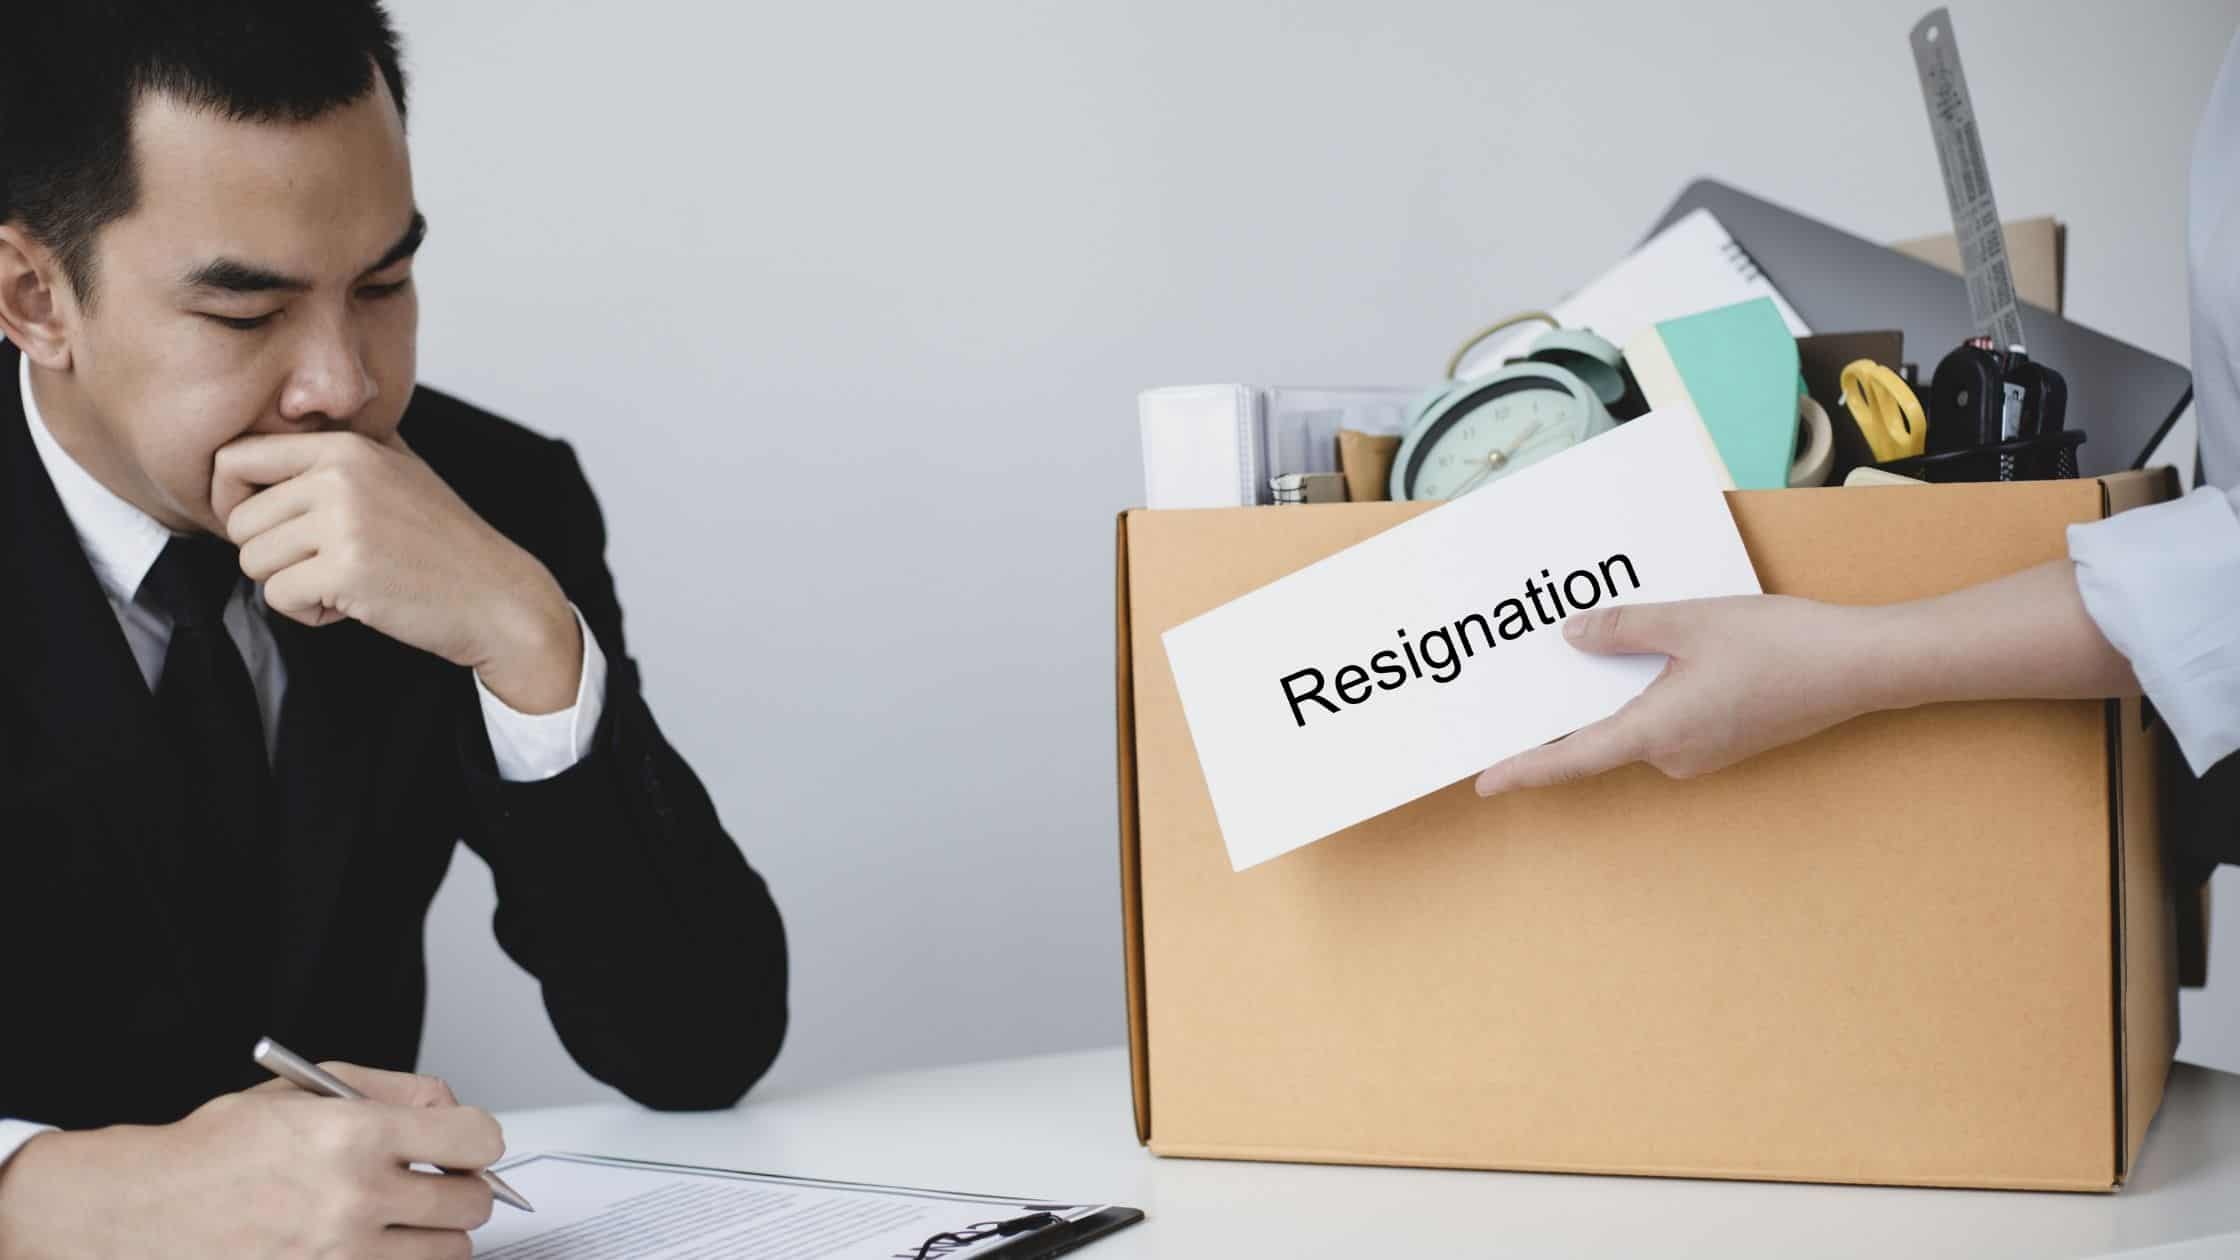 Retain your employees and attract talent to fill your vacancies. The Great Resignation